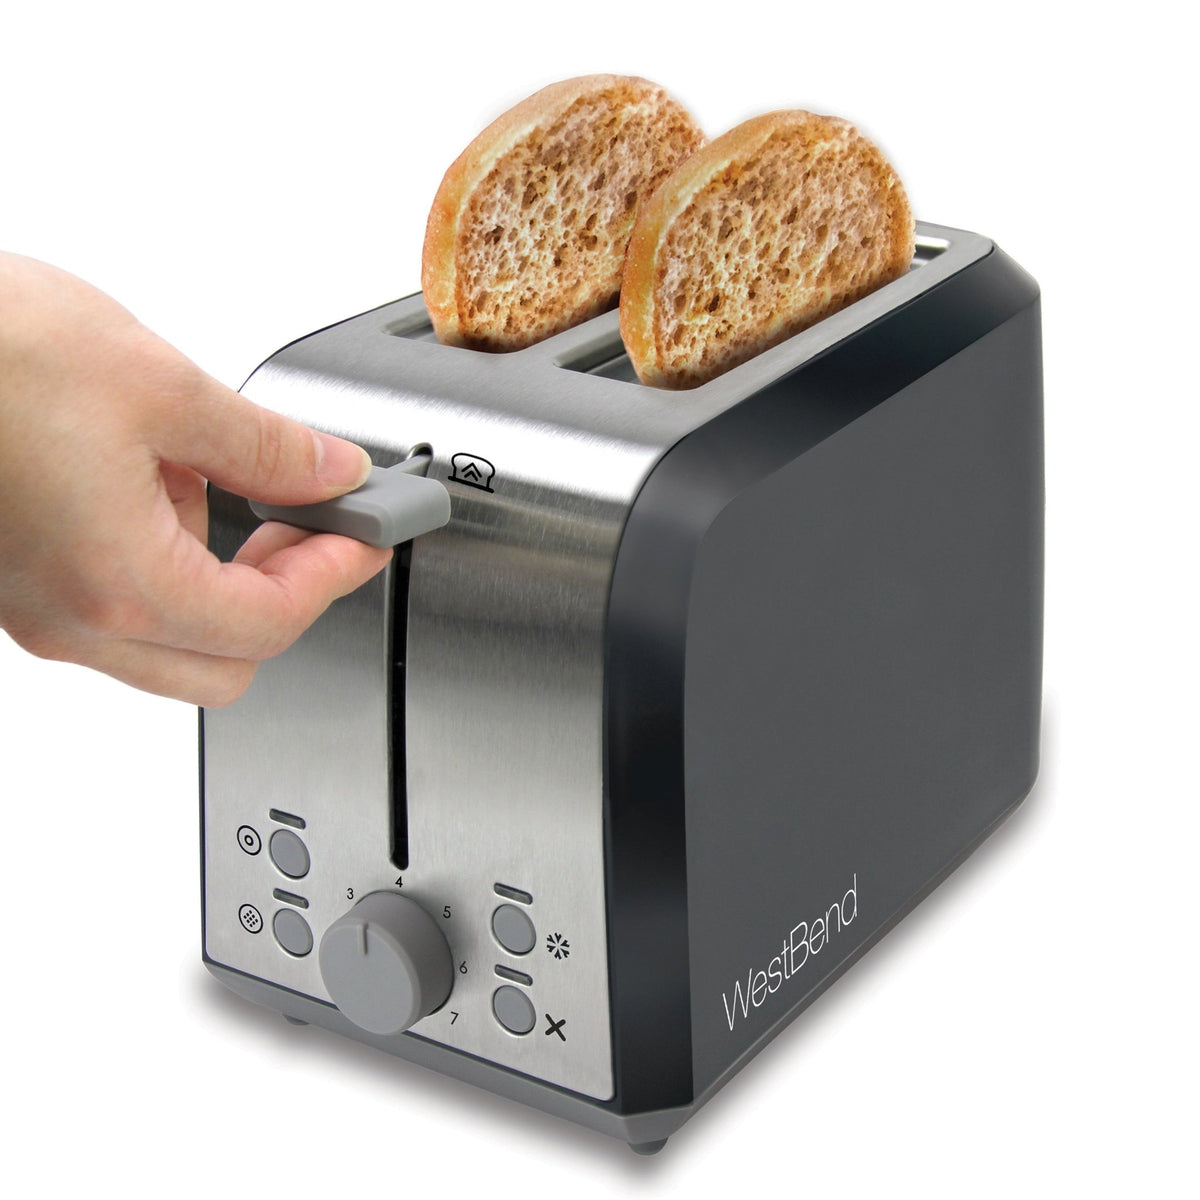 West Bend 77222 Toaster 2 Slice QuikServe Wide Slot Slide Through with  Bagel and Gluten-Free Settings and Cool Touch Exterior Includes Removable